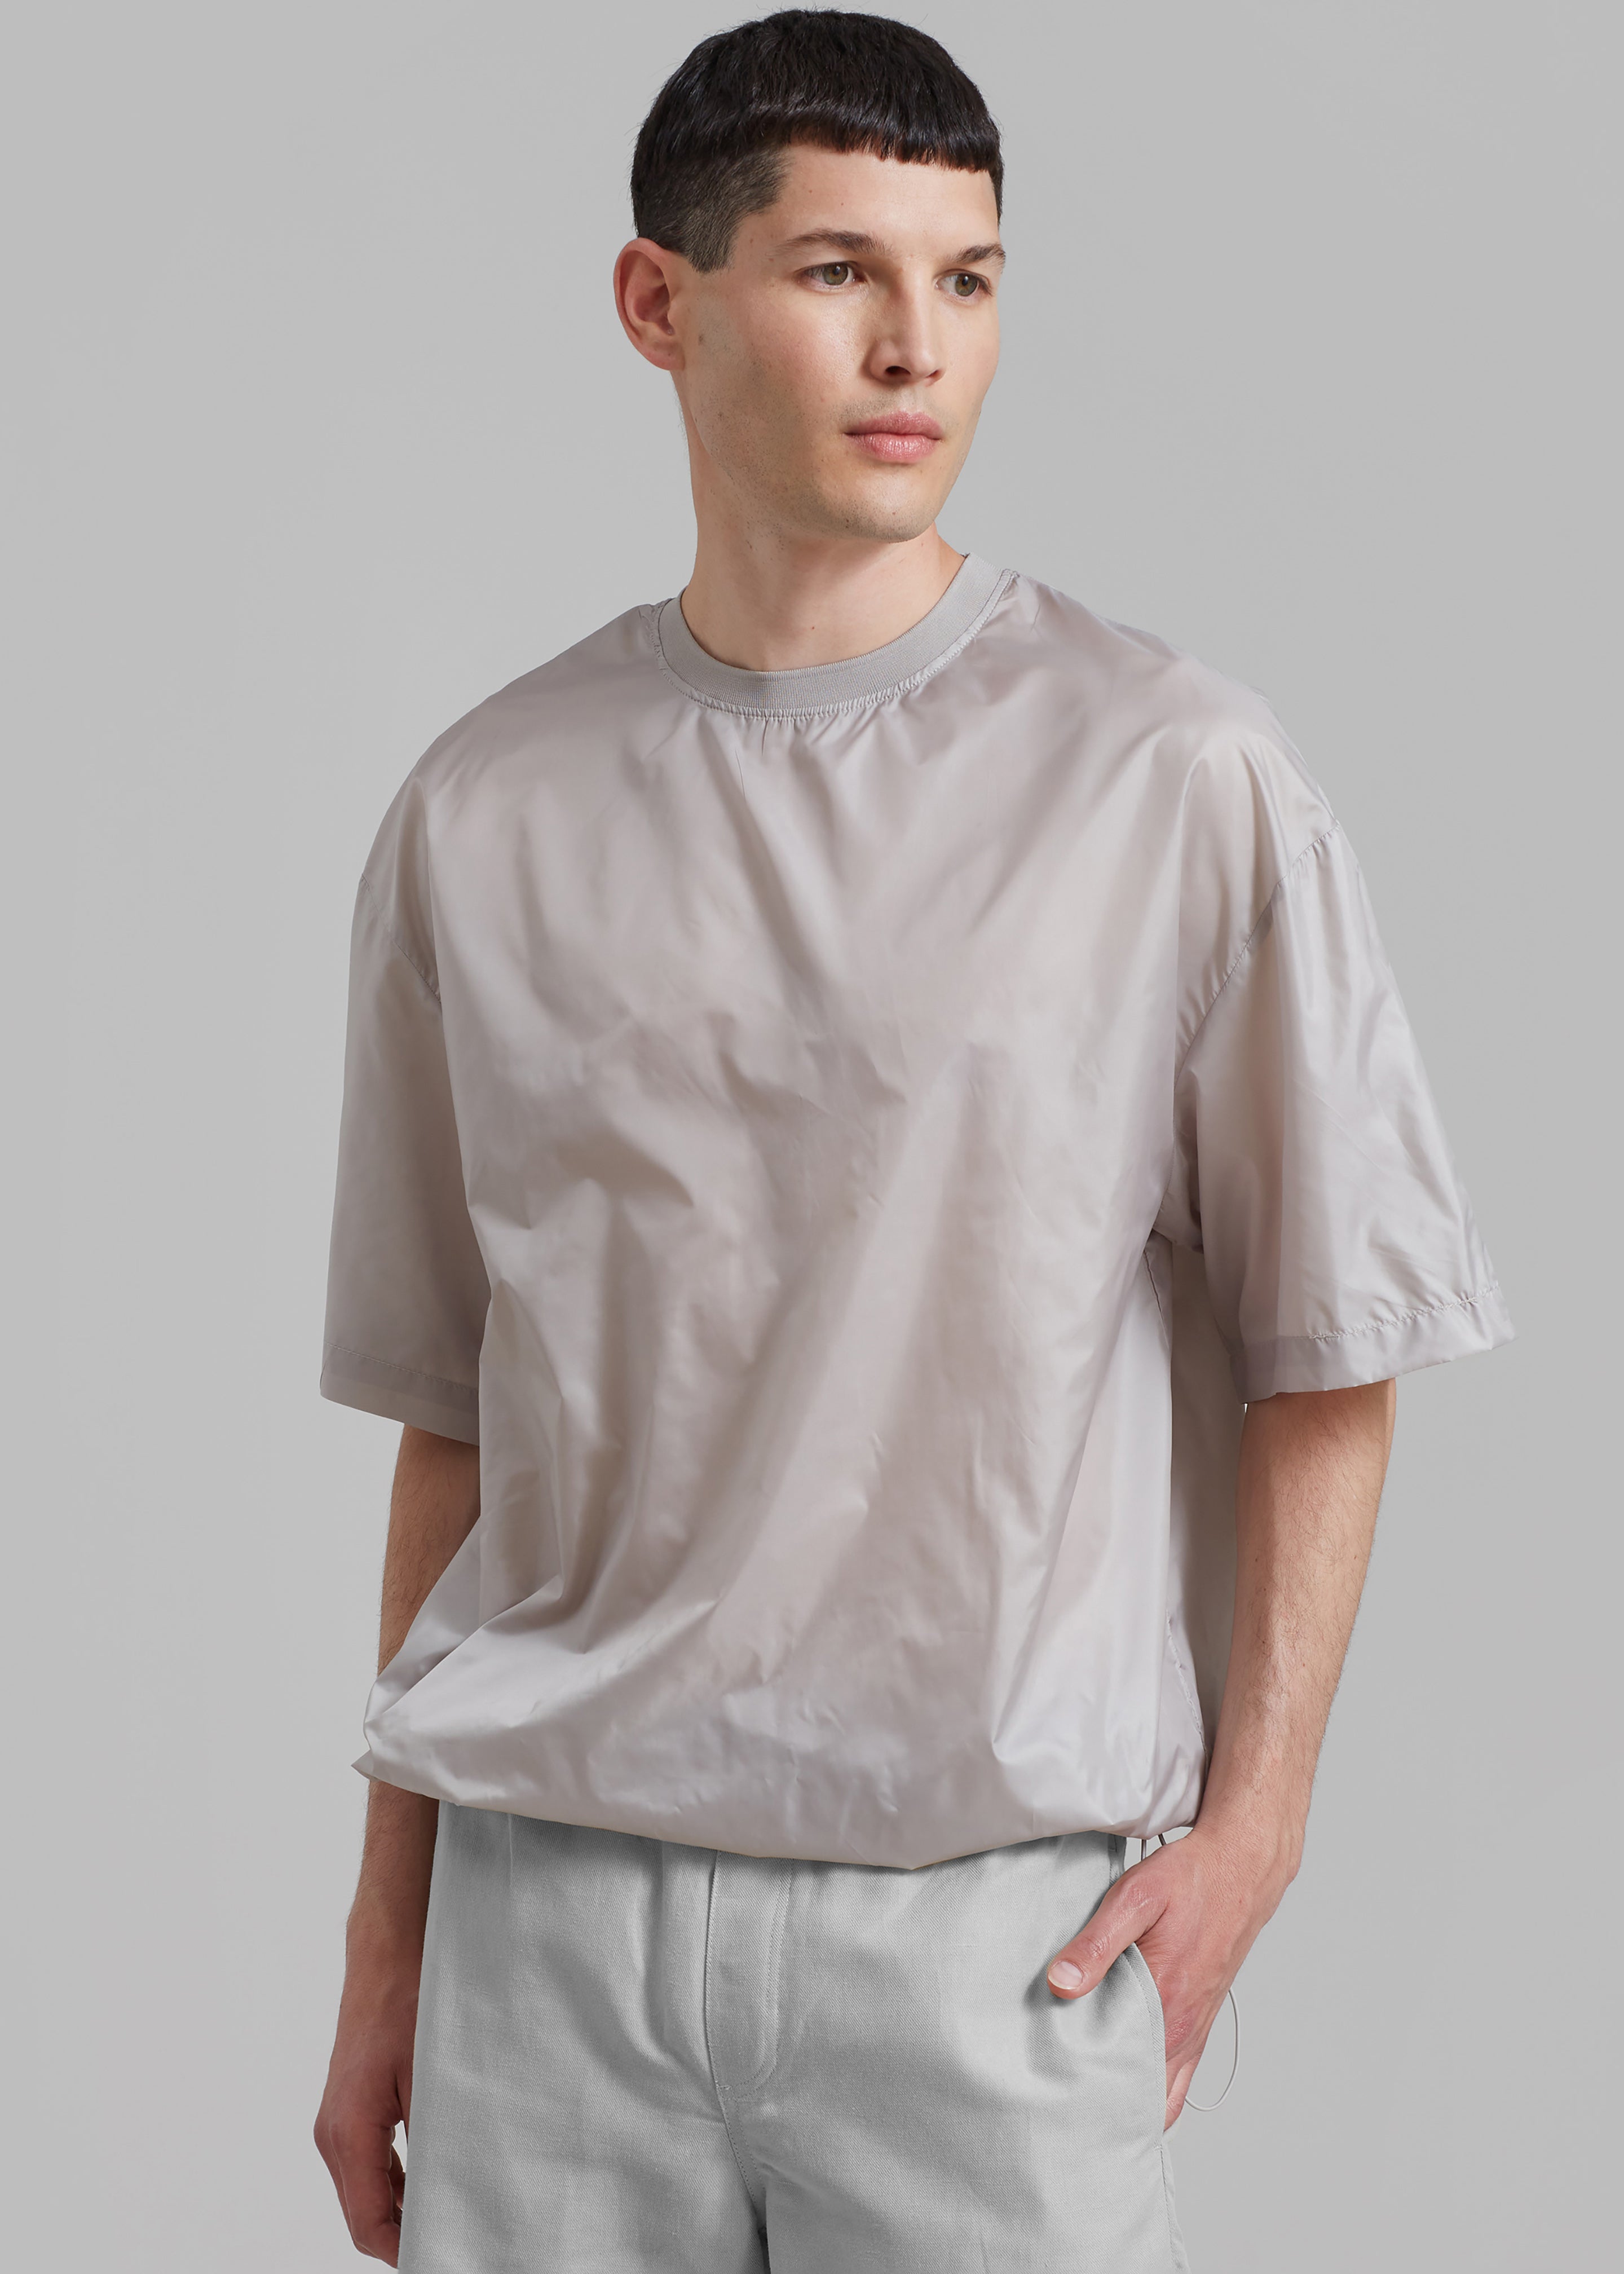 Short Sleeved Drawstring Top Offwhite